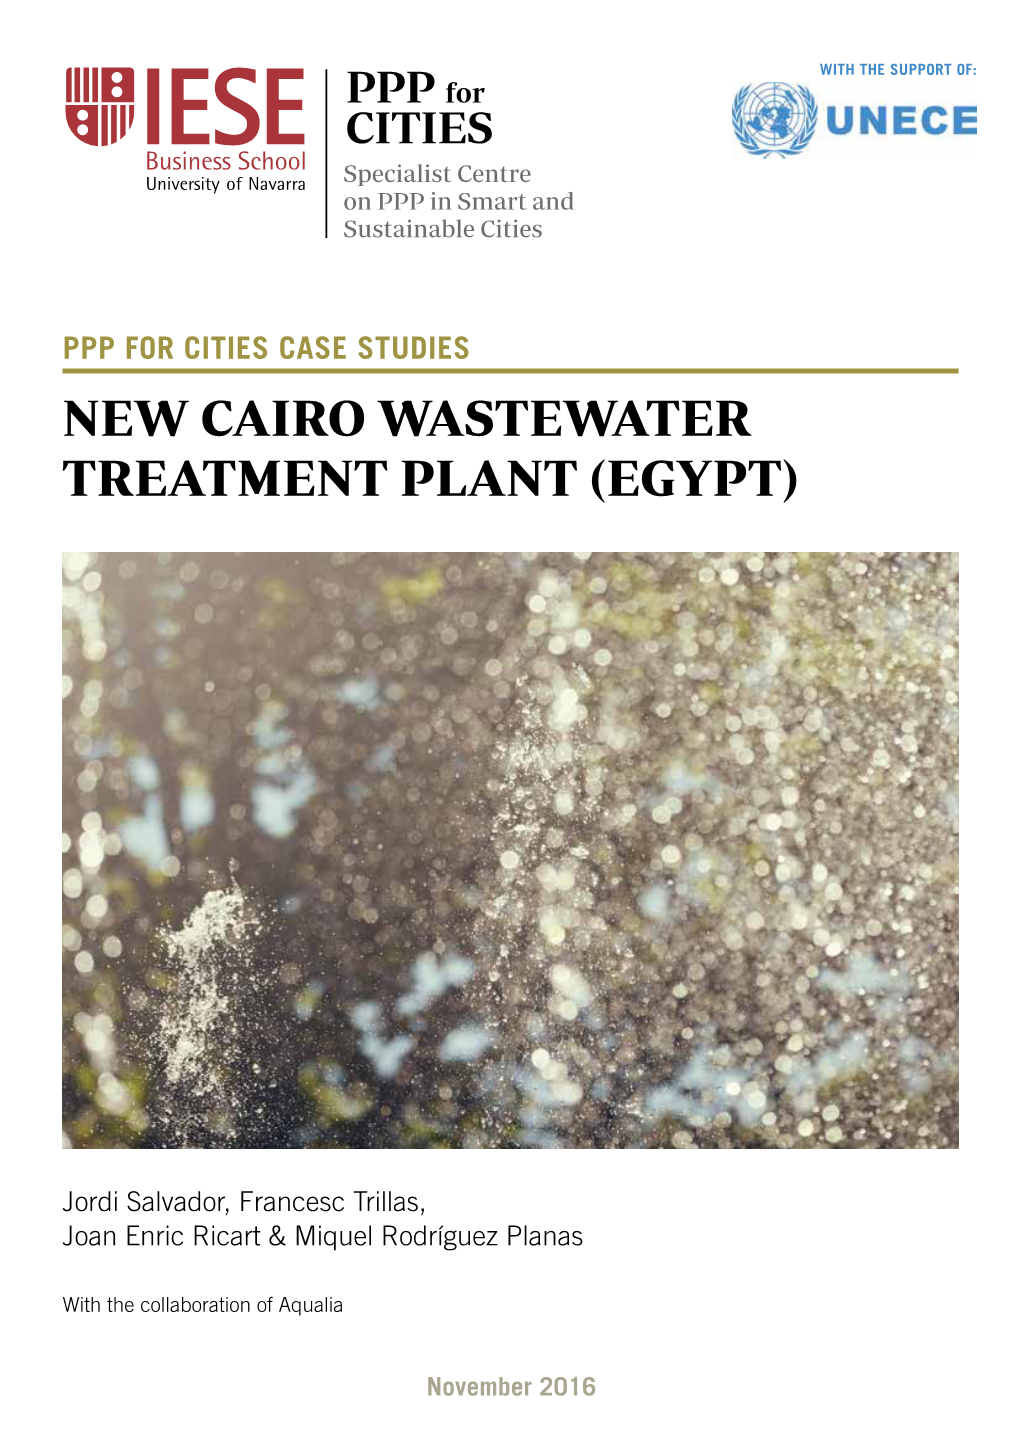 New Cairo Wastewater Treatment Plant (Egypt)